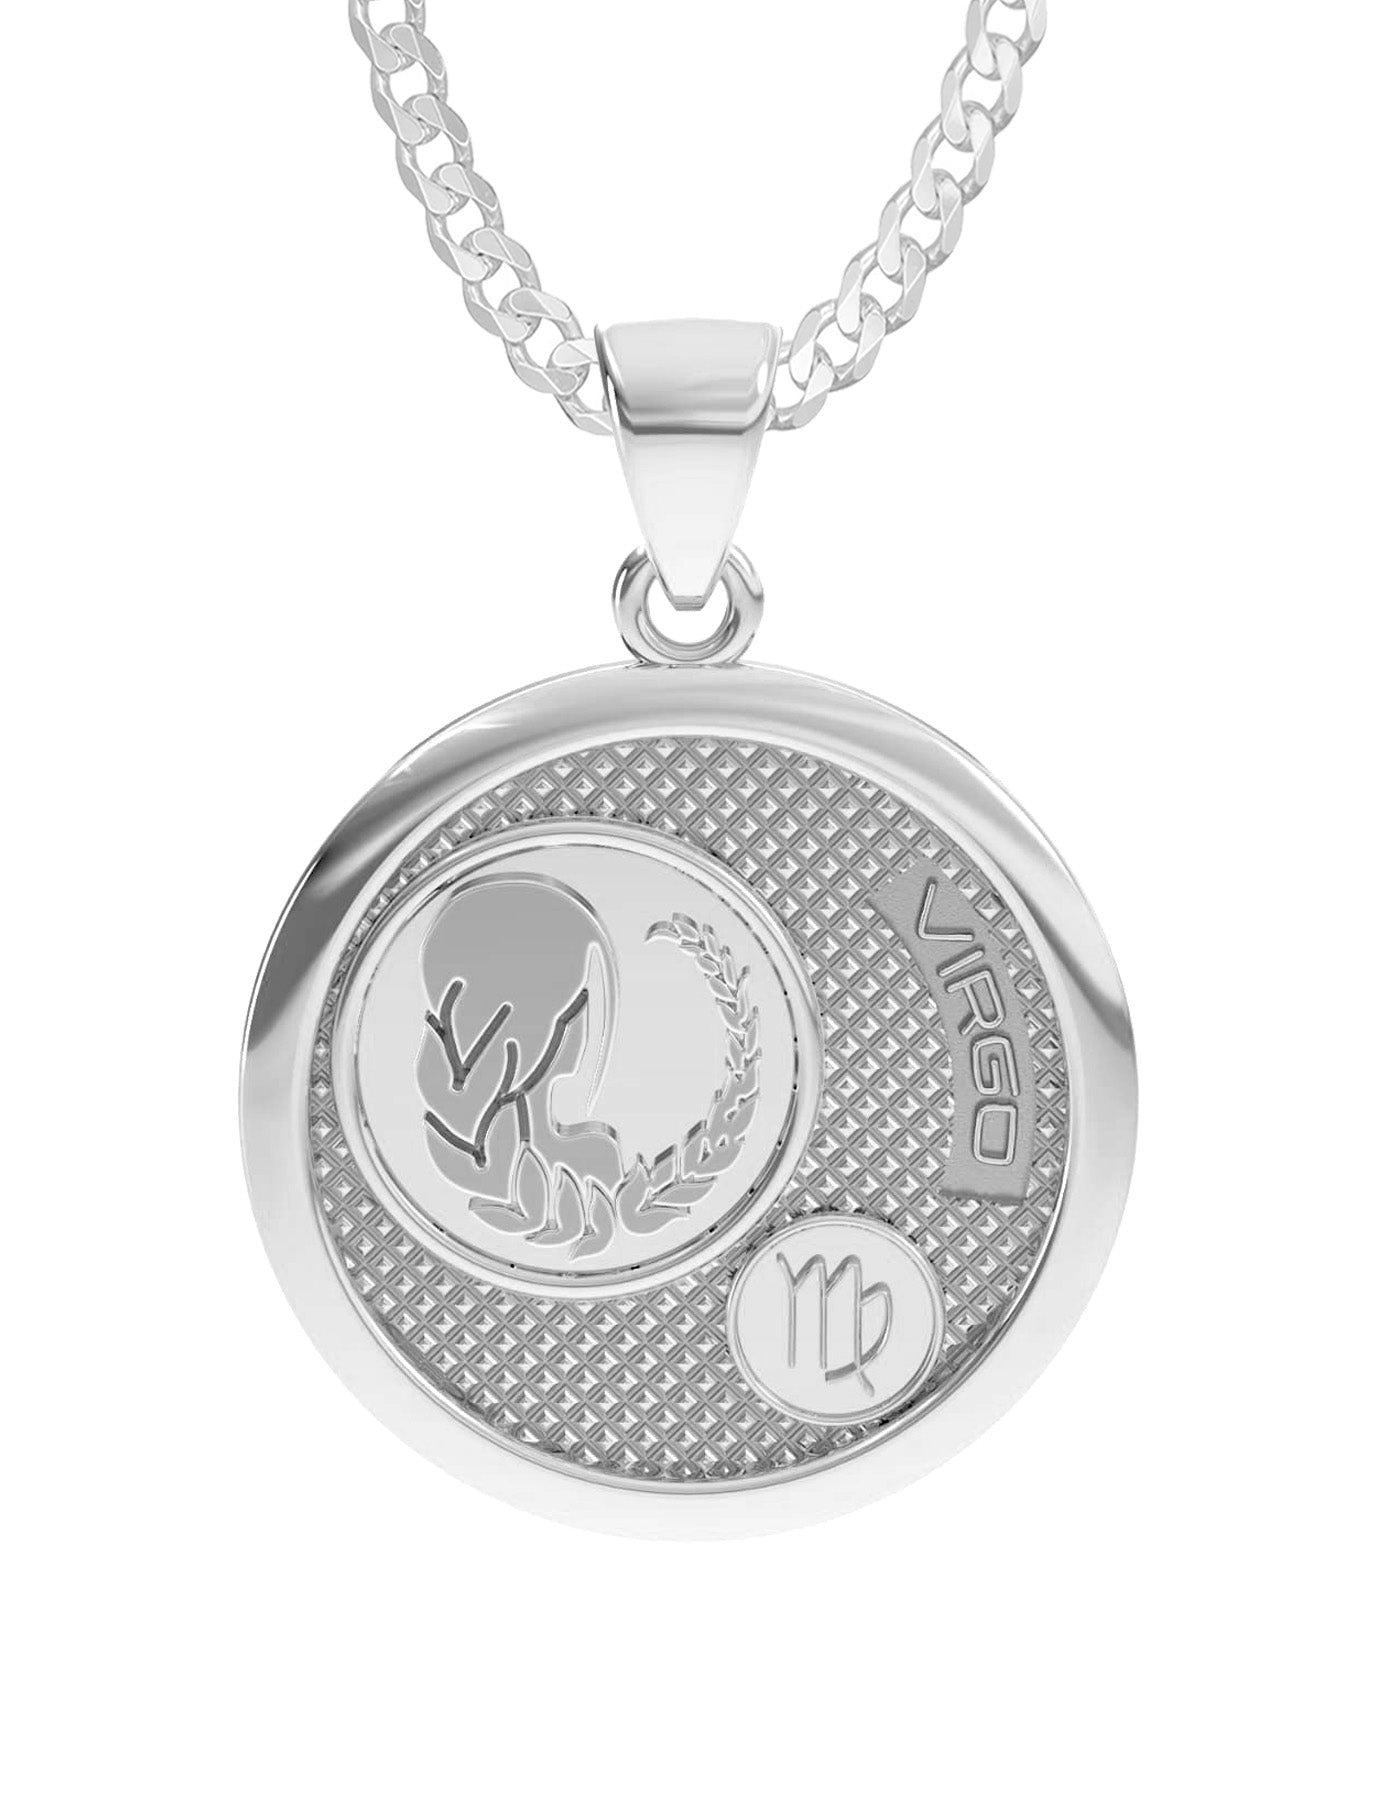 Engraved Silver Heart Necklace - Astrology Virgo Girl - Lizzy Pritty Arts